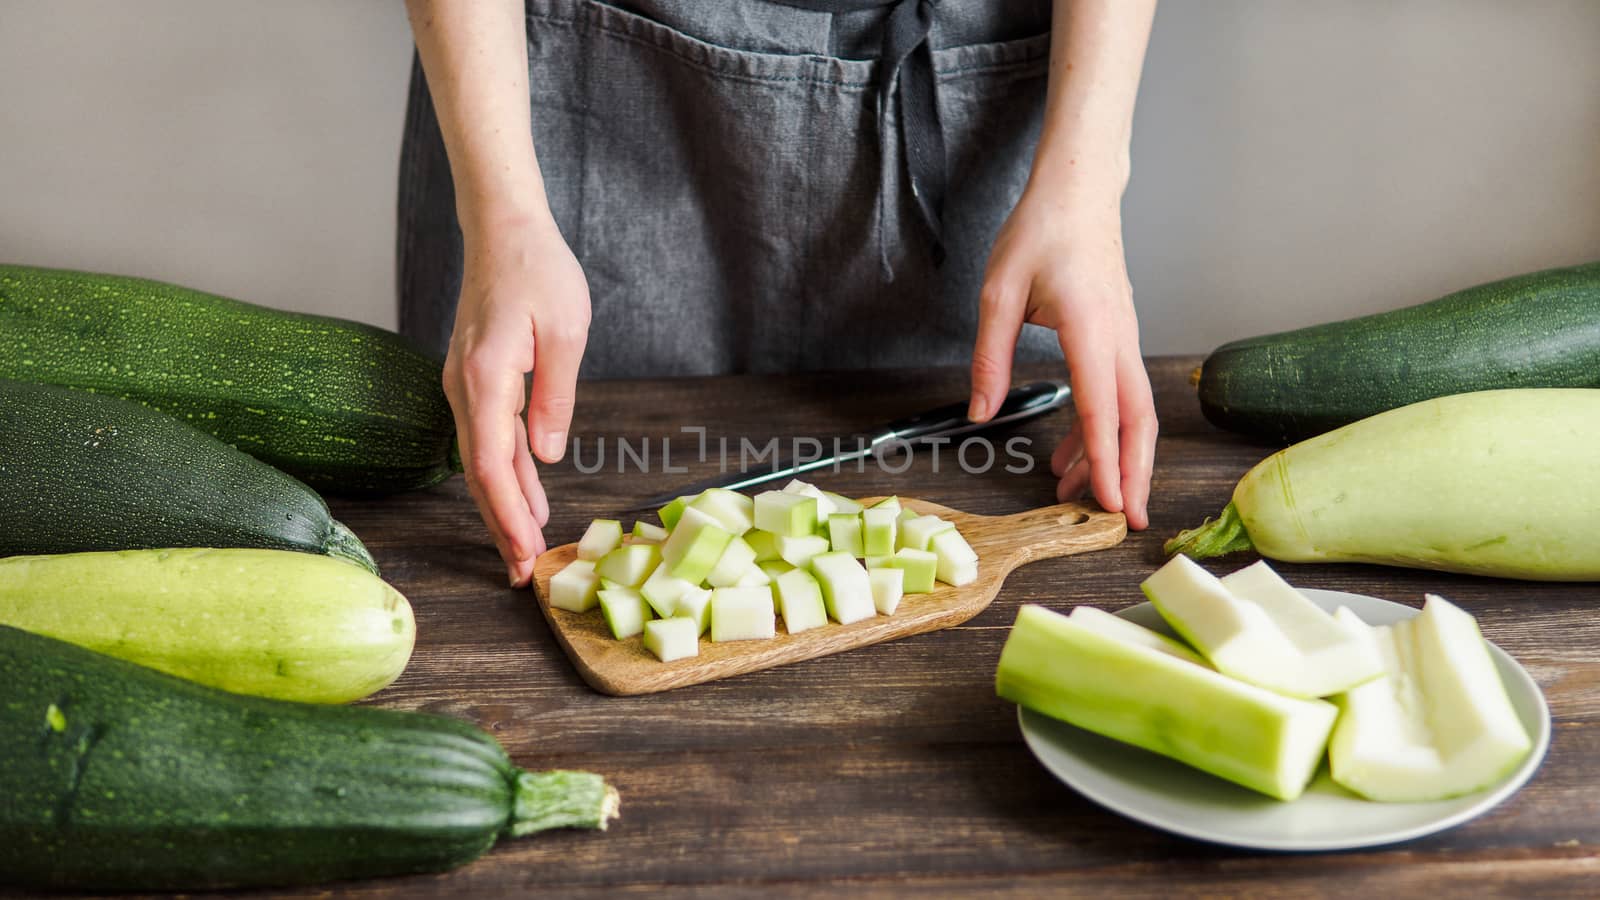 Zucchini harvest. Woman slices zucchini cubes for freezing on wooden table. Farm organic zucchini harvesting